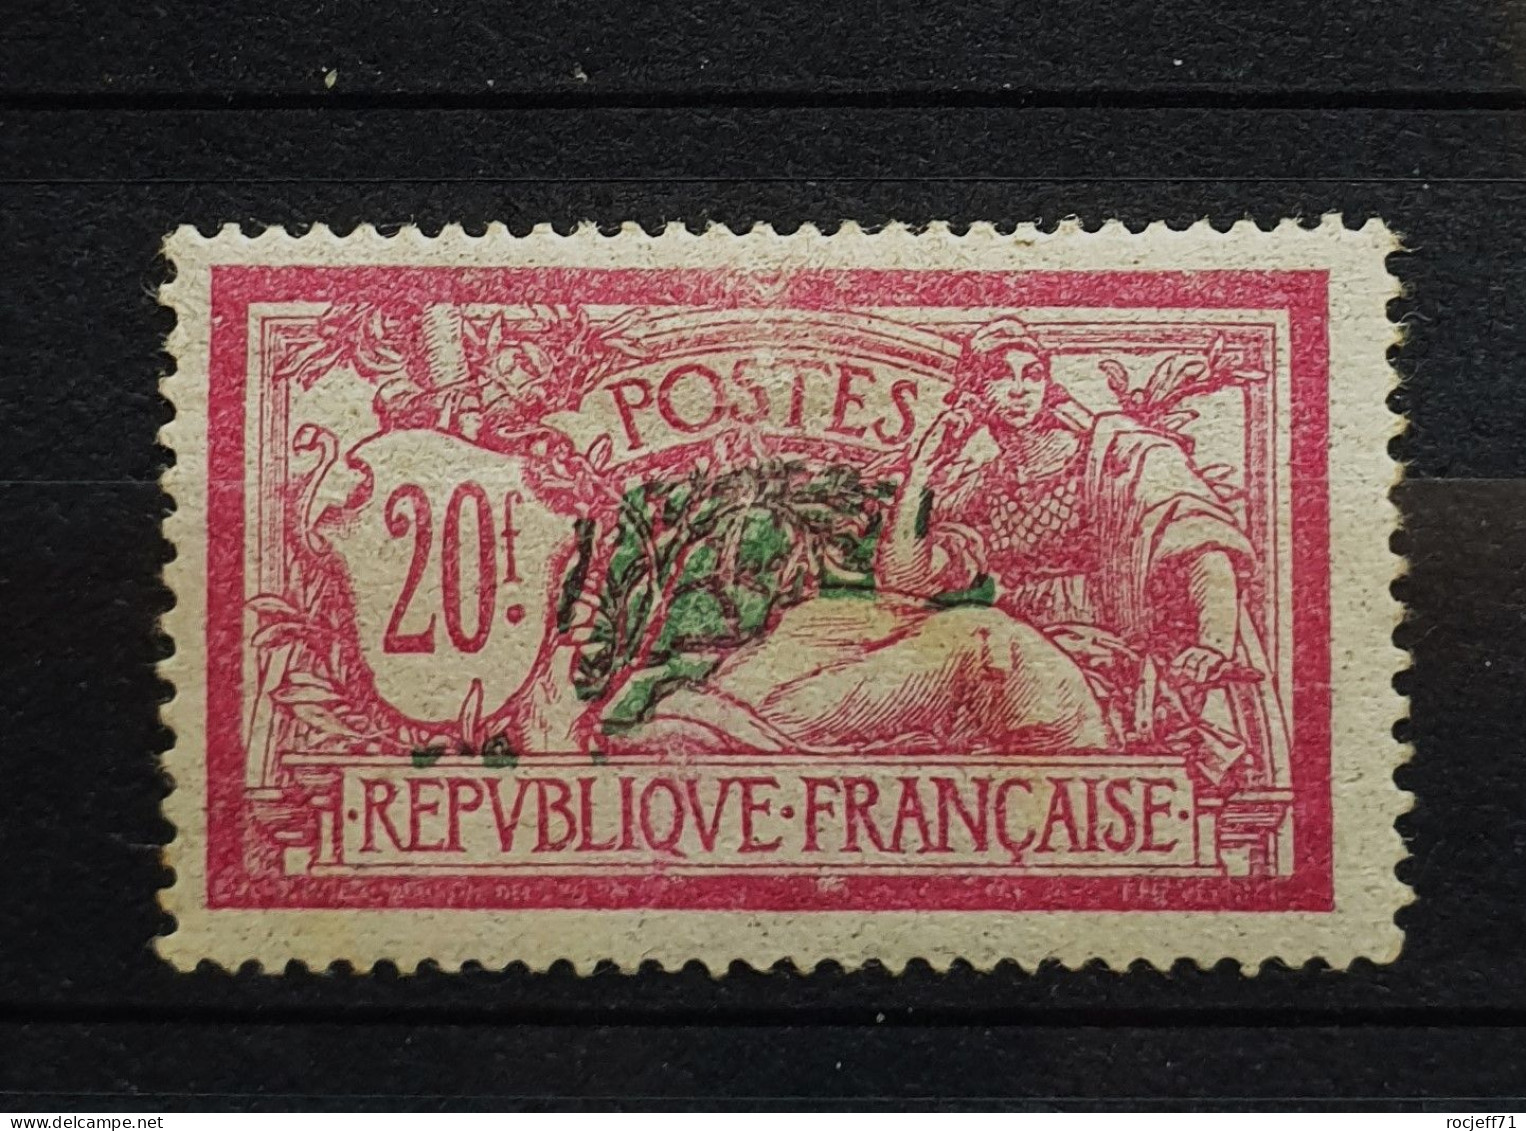 05 - 24 - France - 20F Merson N° 208 * - MH - Cote : 230 Euros - Unused Stamps